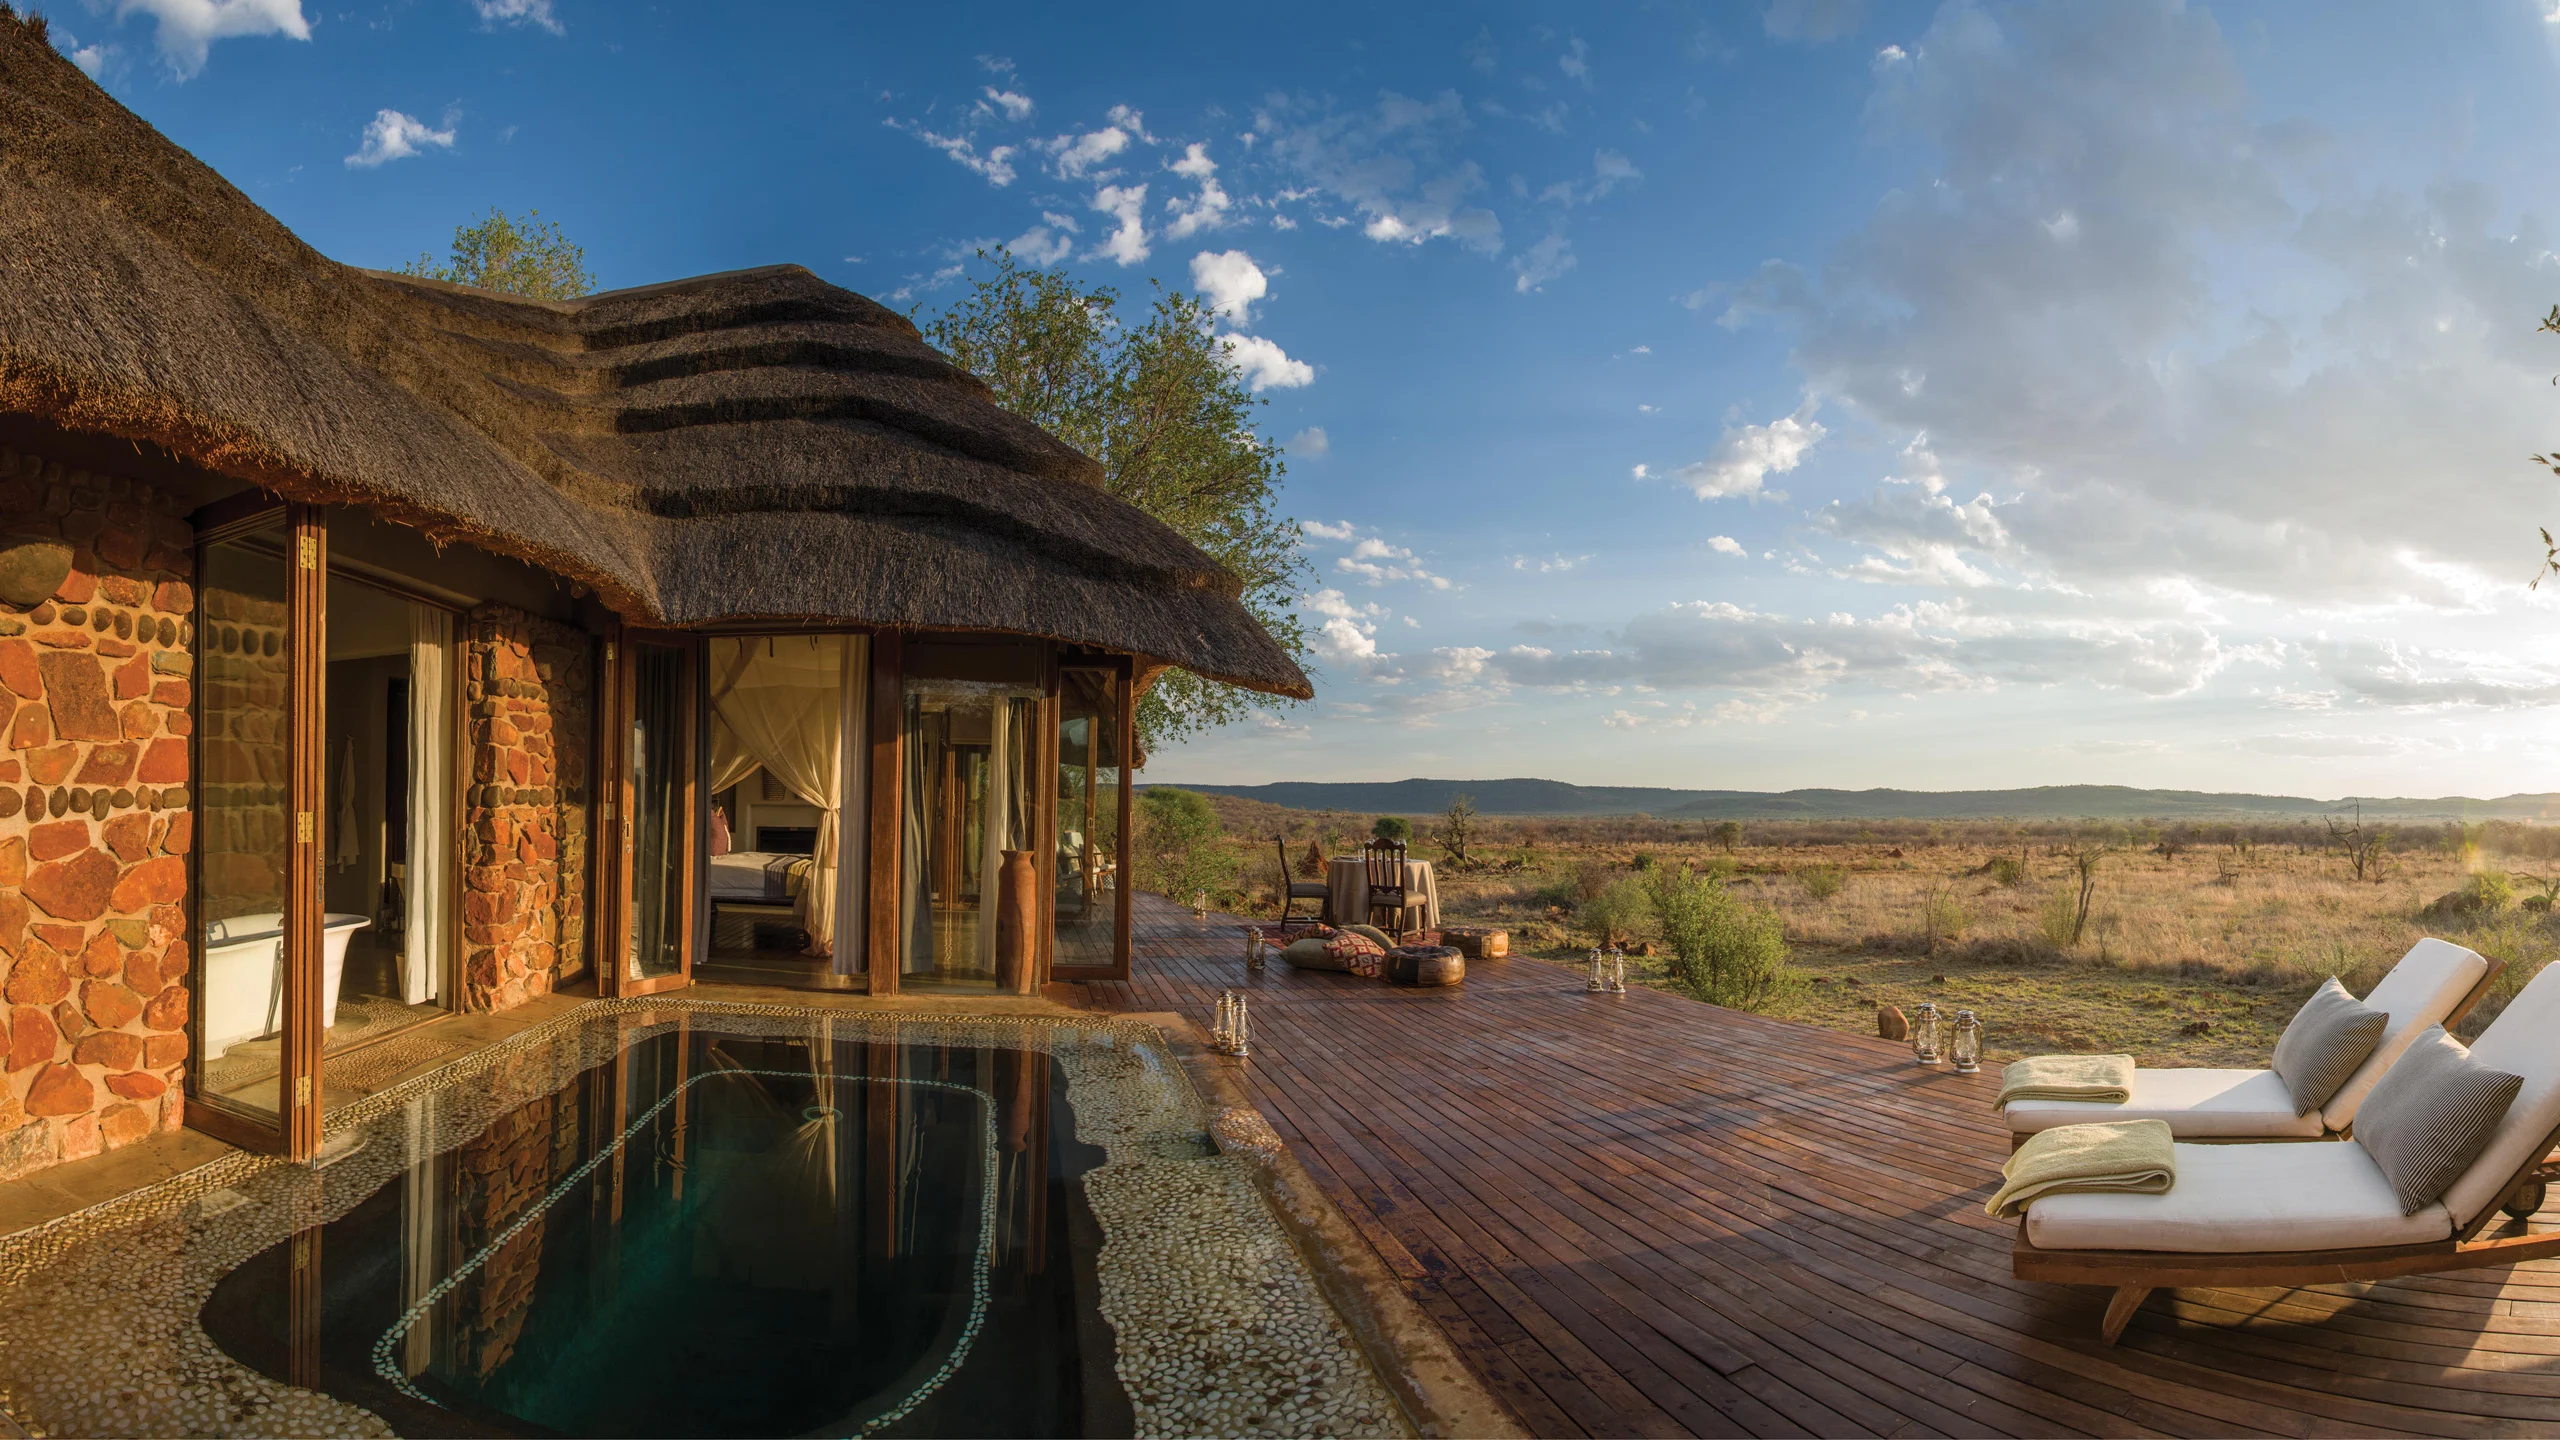 8 Incredible Luxury Hotels And Lodges To Experience In Africa